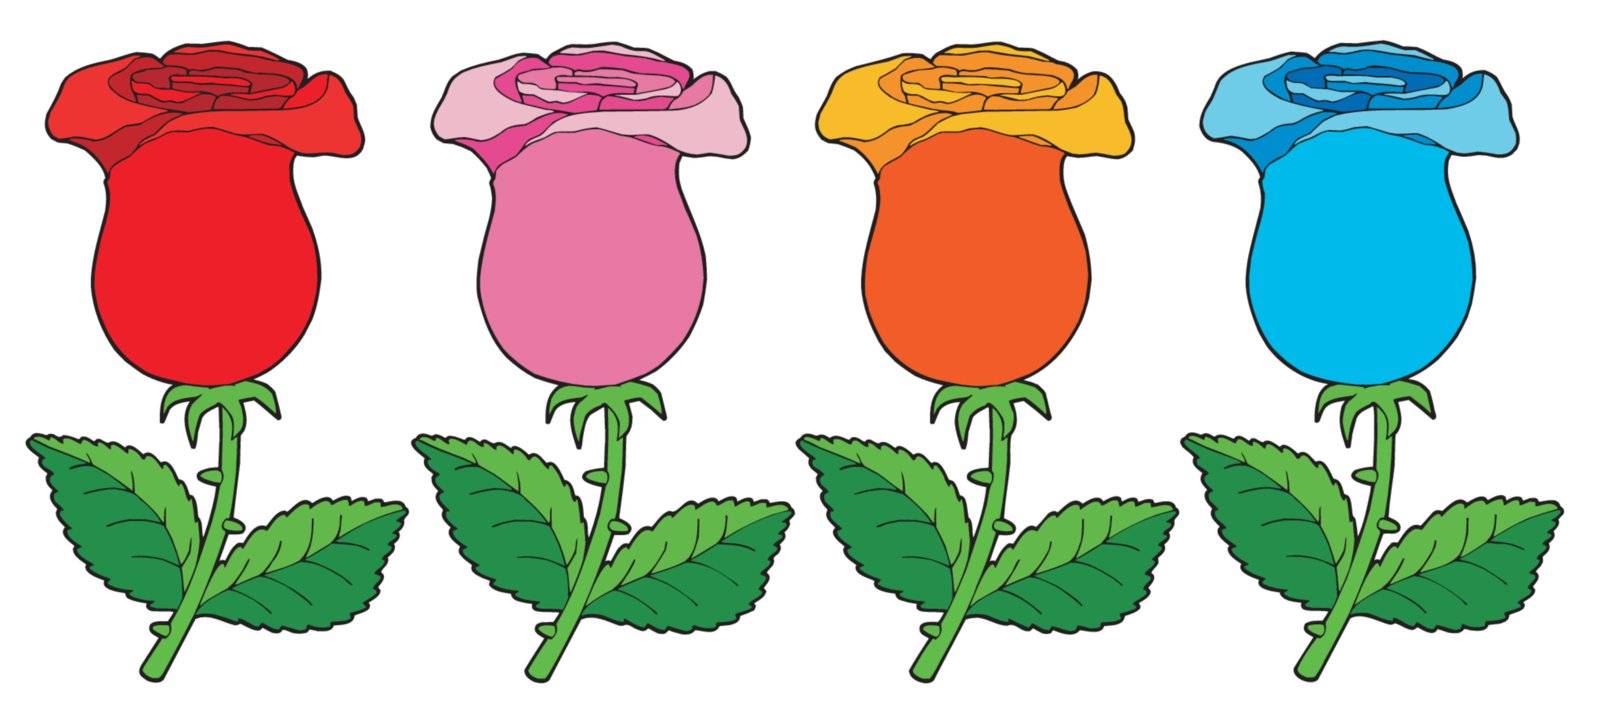 Various color roses collection - vector illustration.